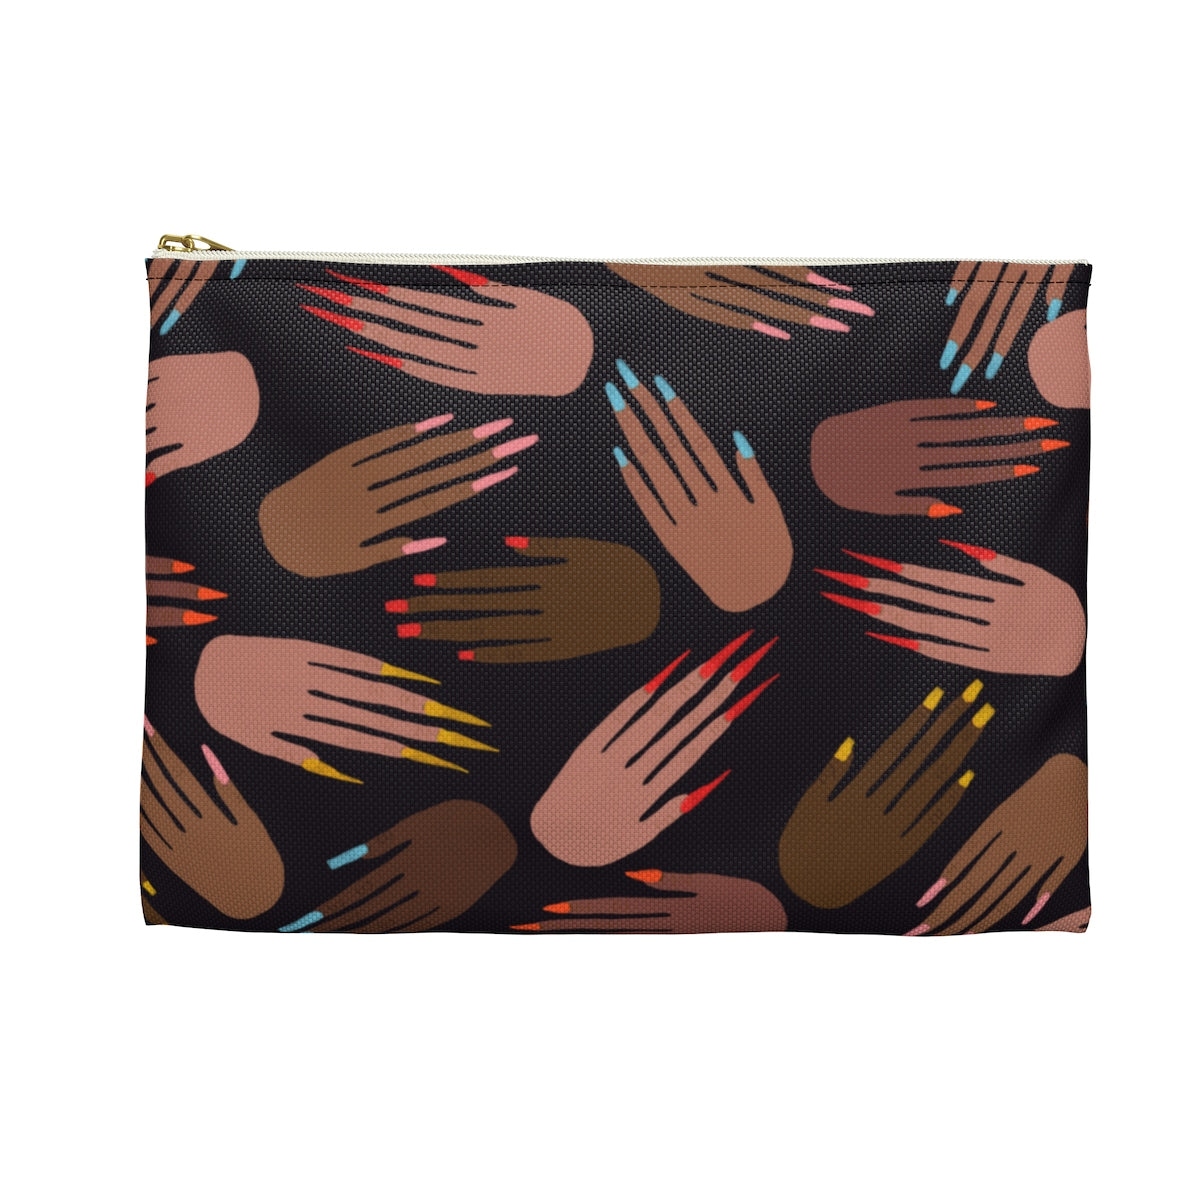 Pro Nails Accessory Pouch